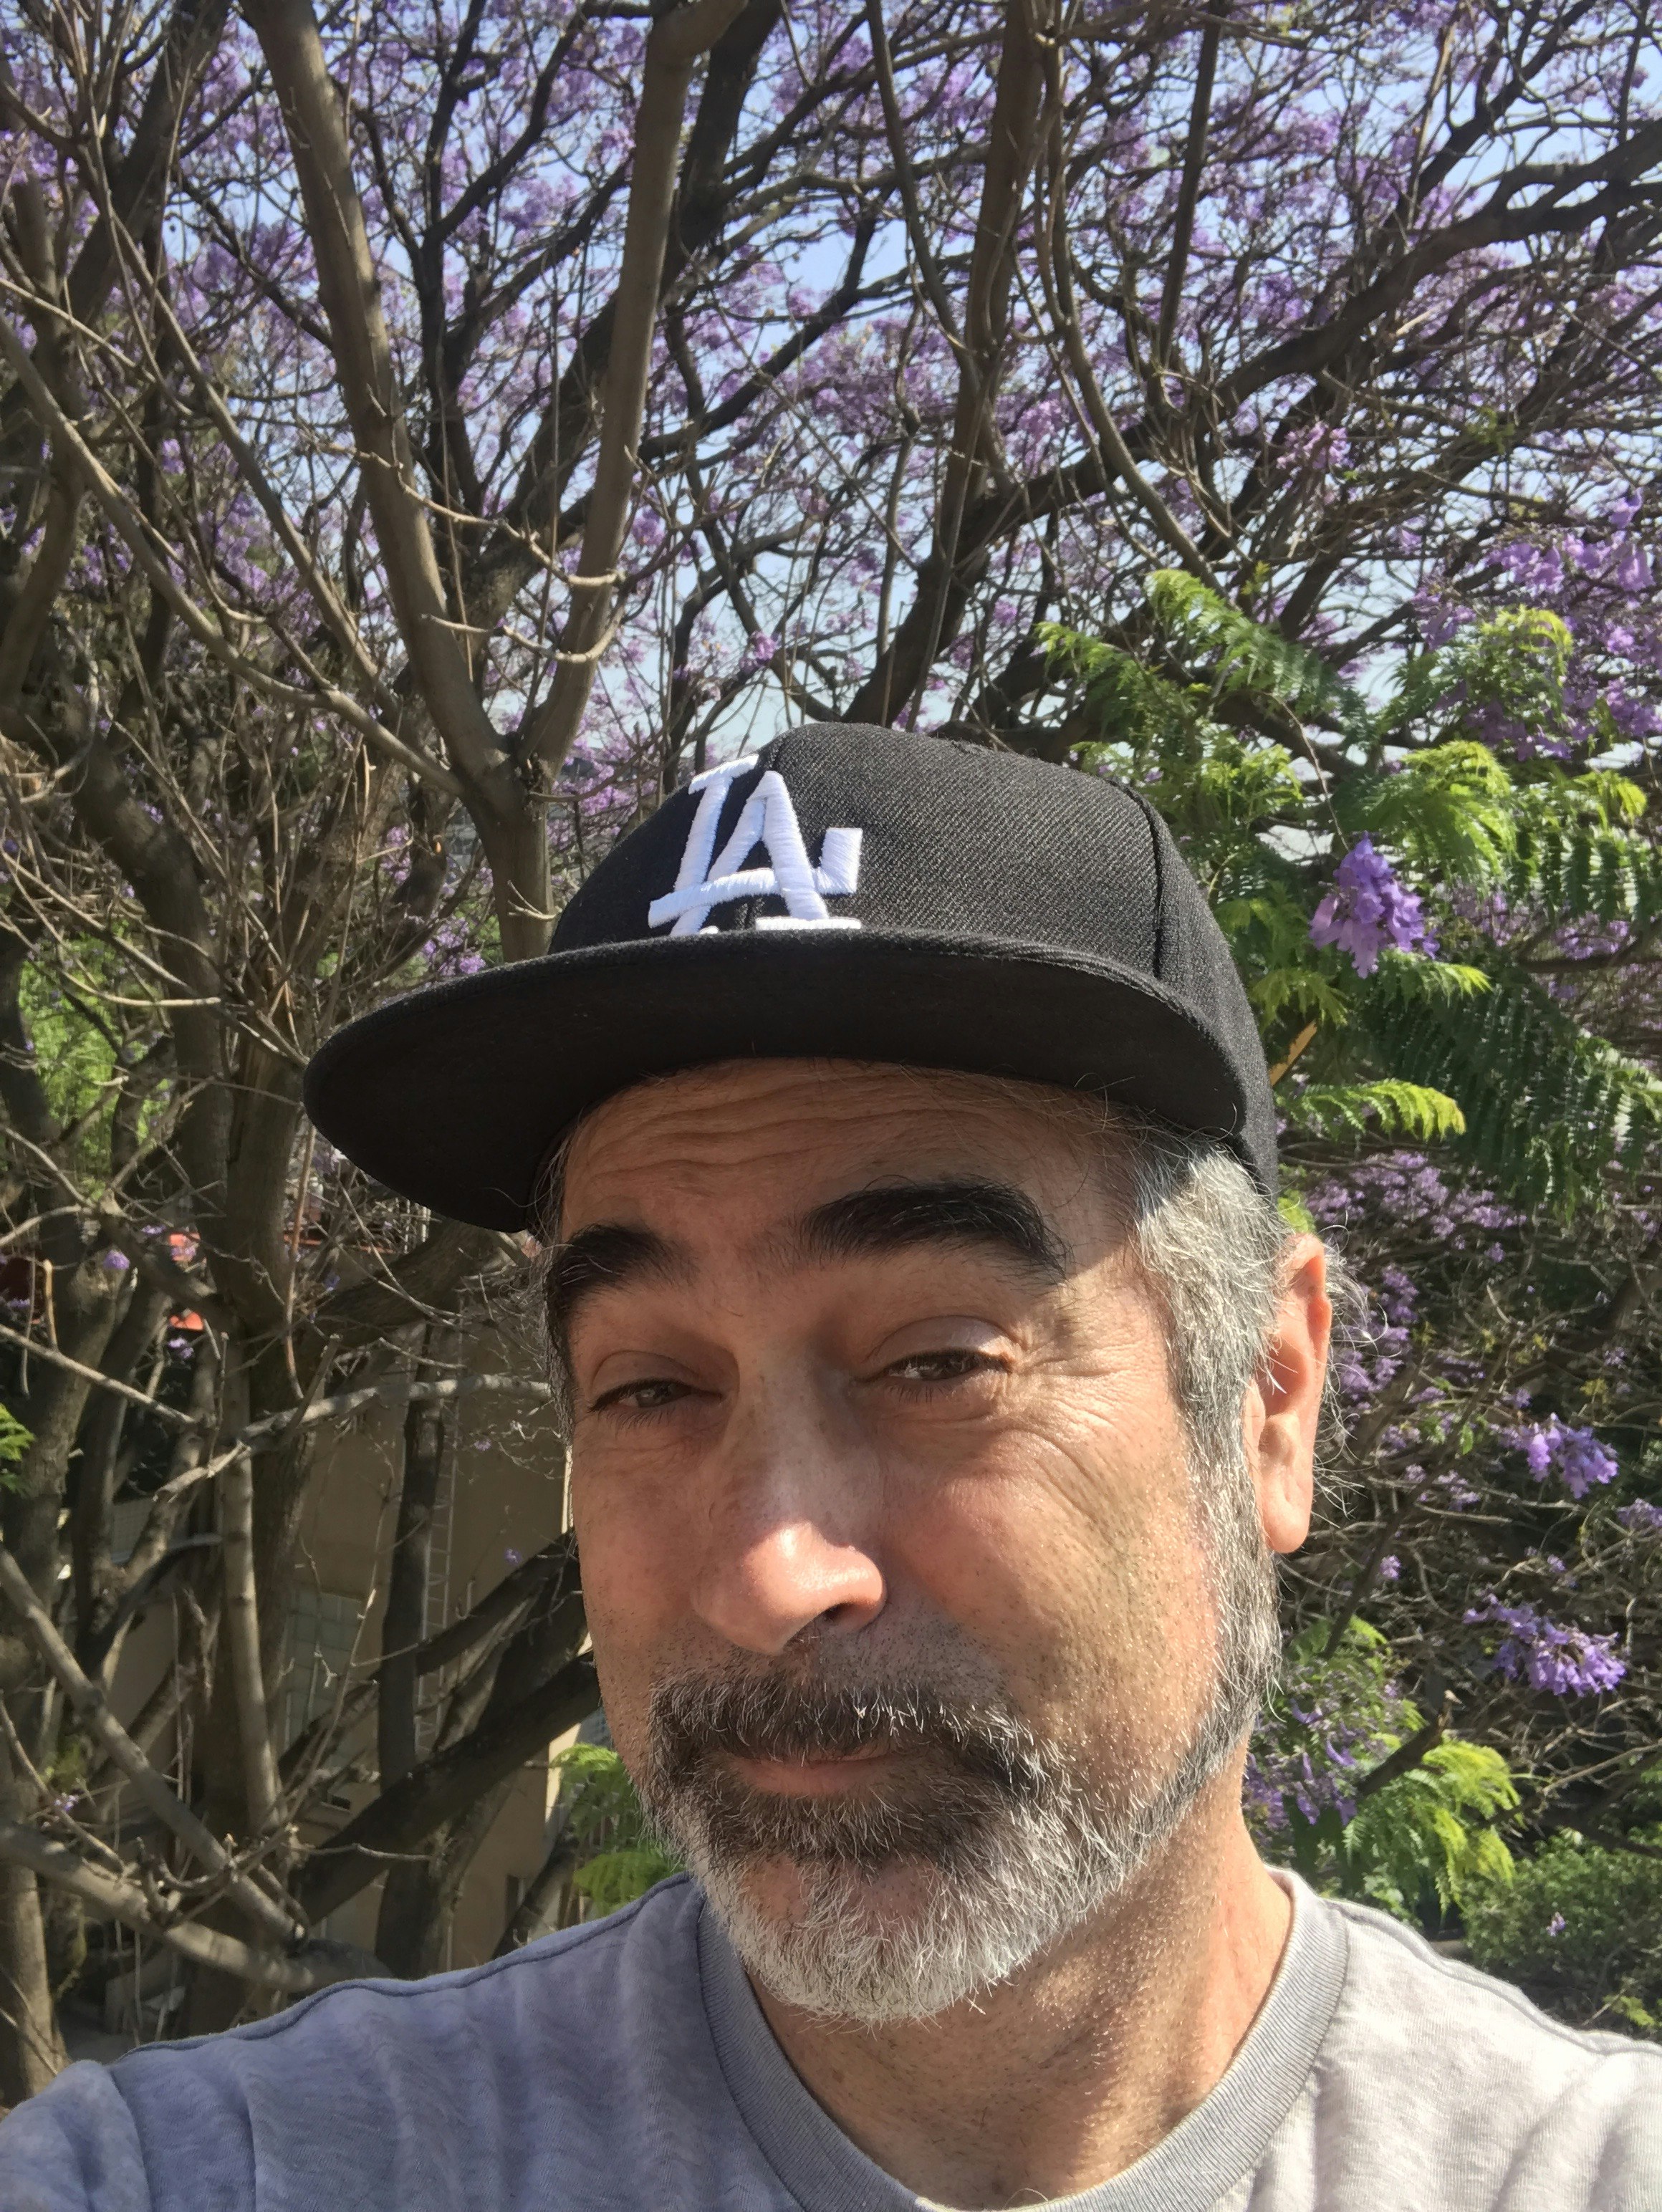 A man in a baseball cap in front of a flowering tree